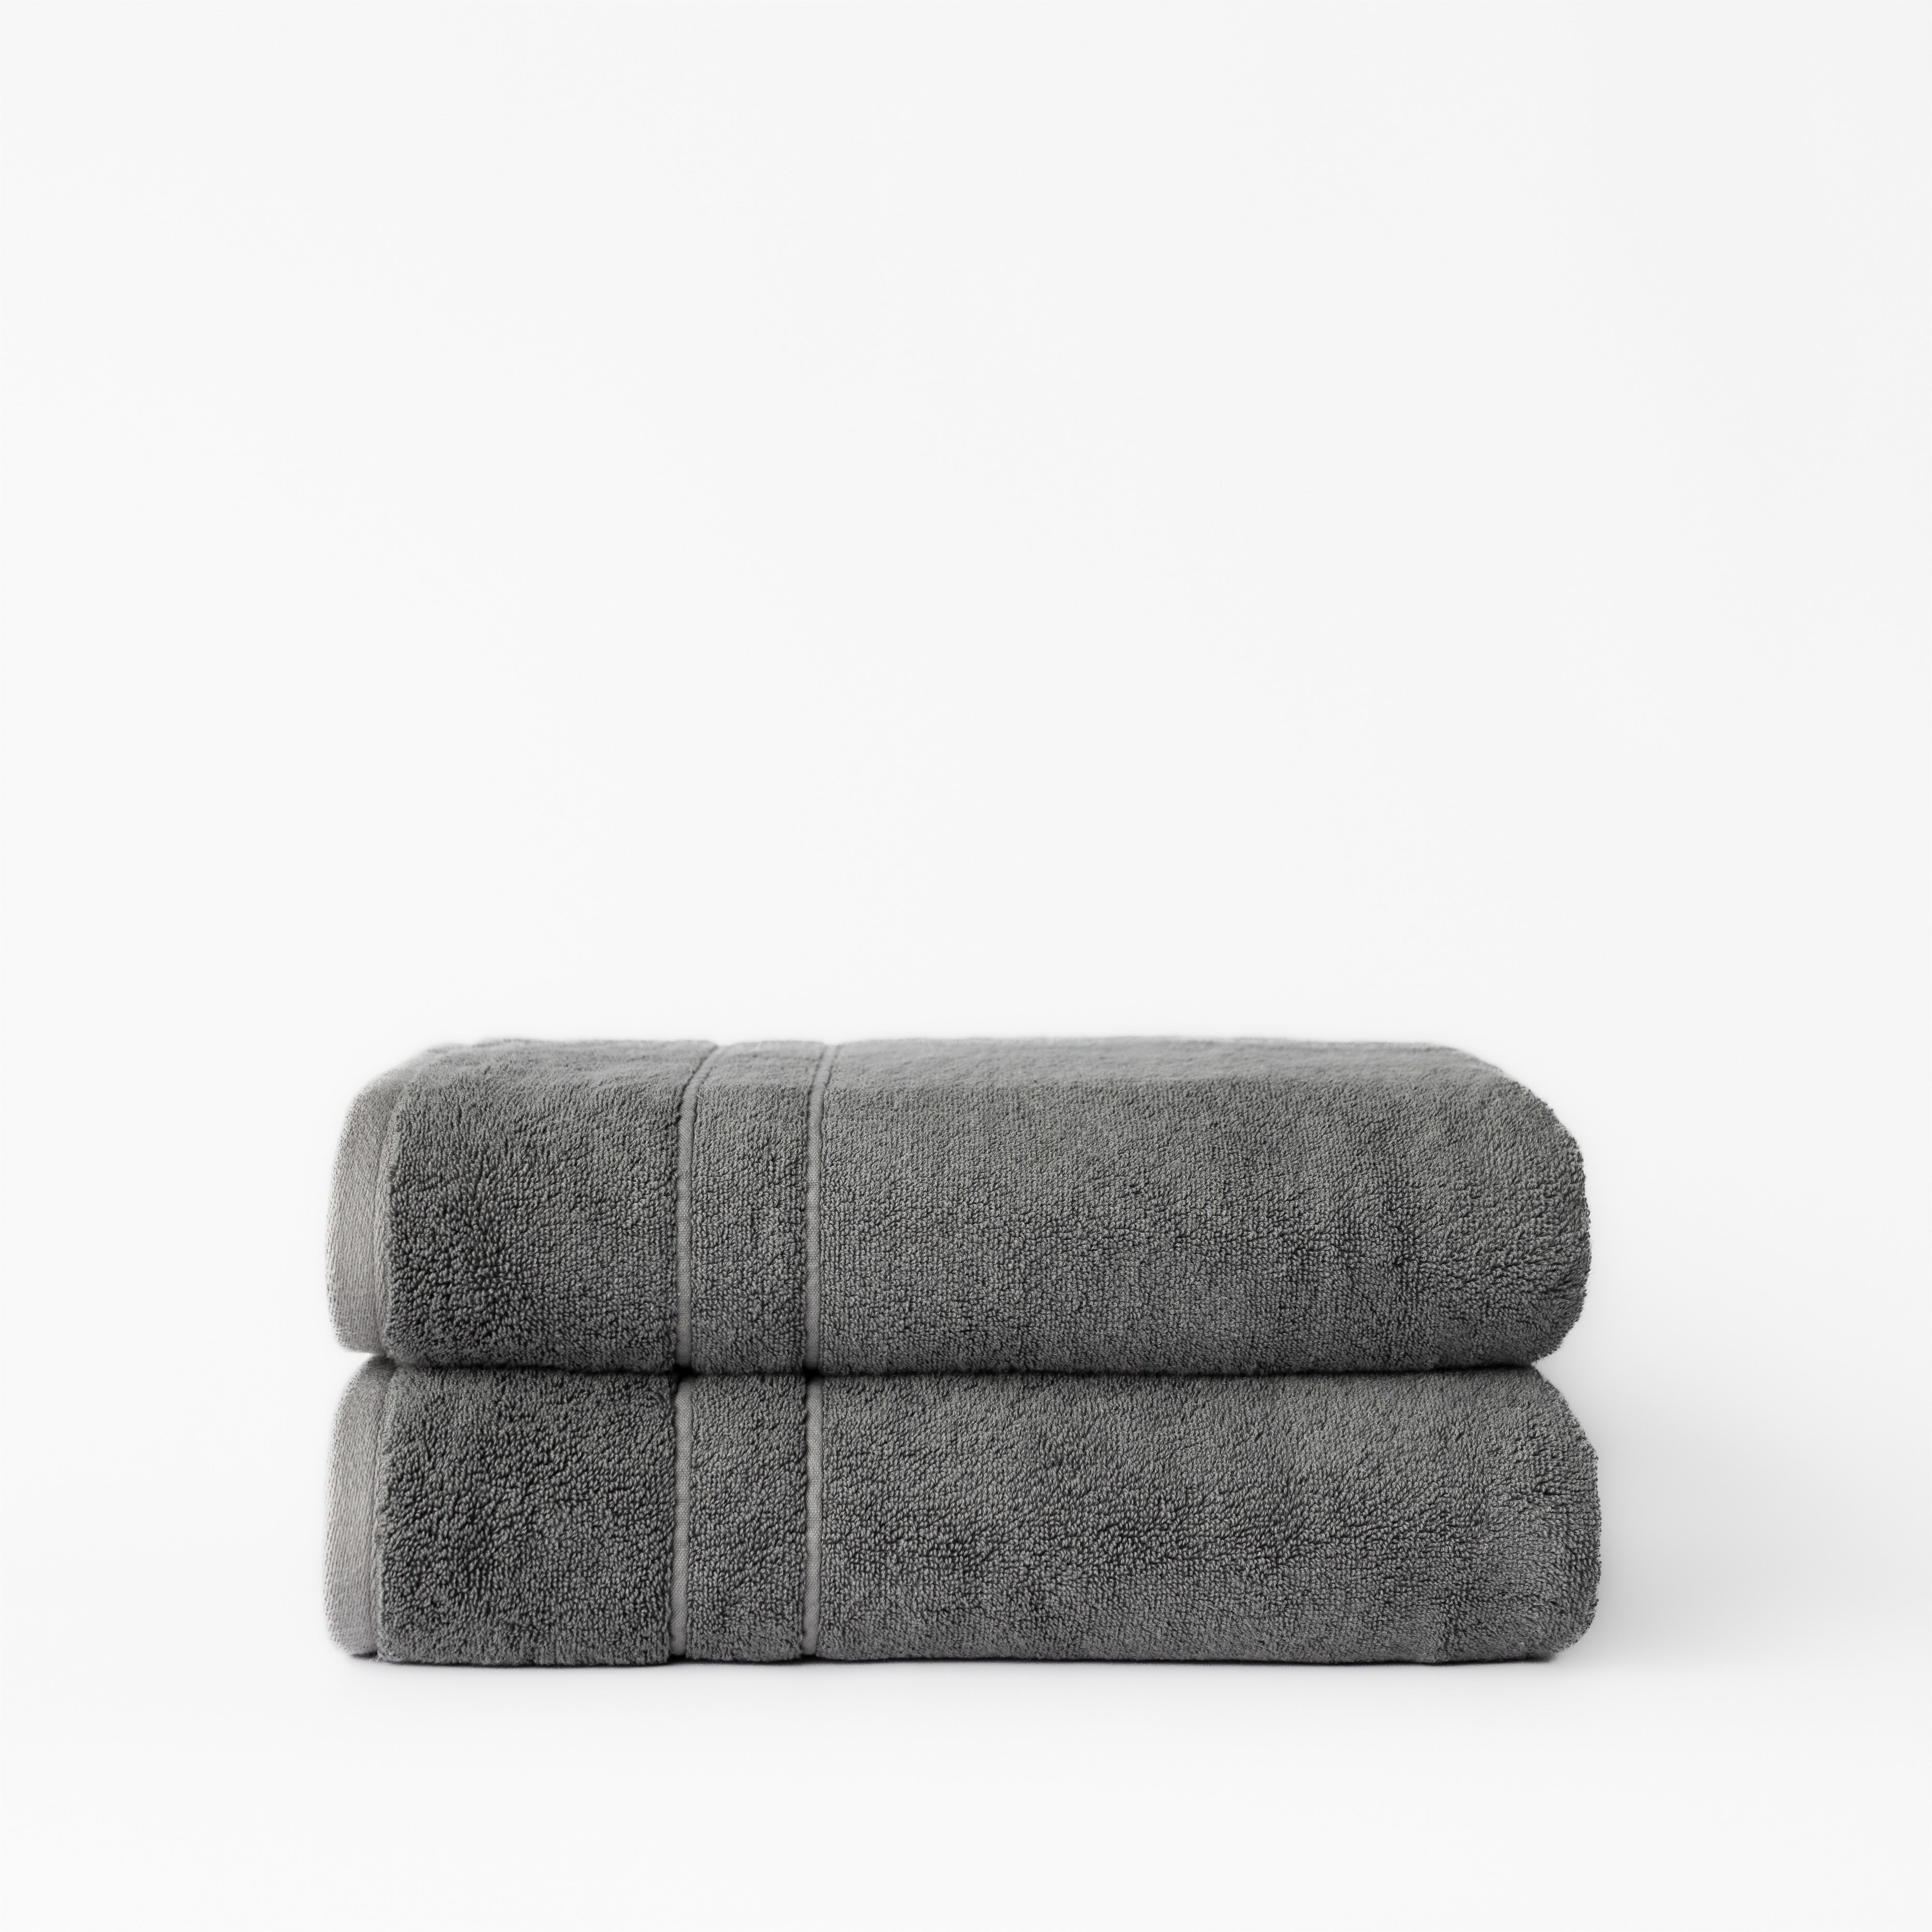 Premium Plush Bath Towels in the color Charcoal. Photo of Complete Premium Plush Bath Bundle taken with white background |Color:Charcoal